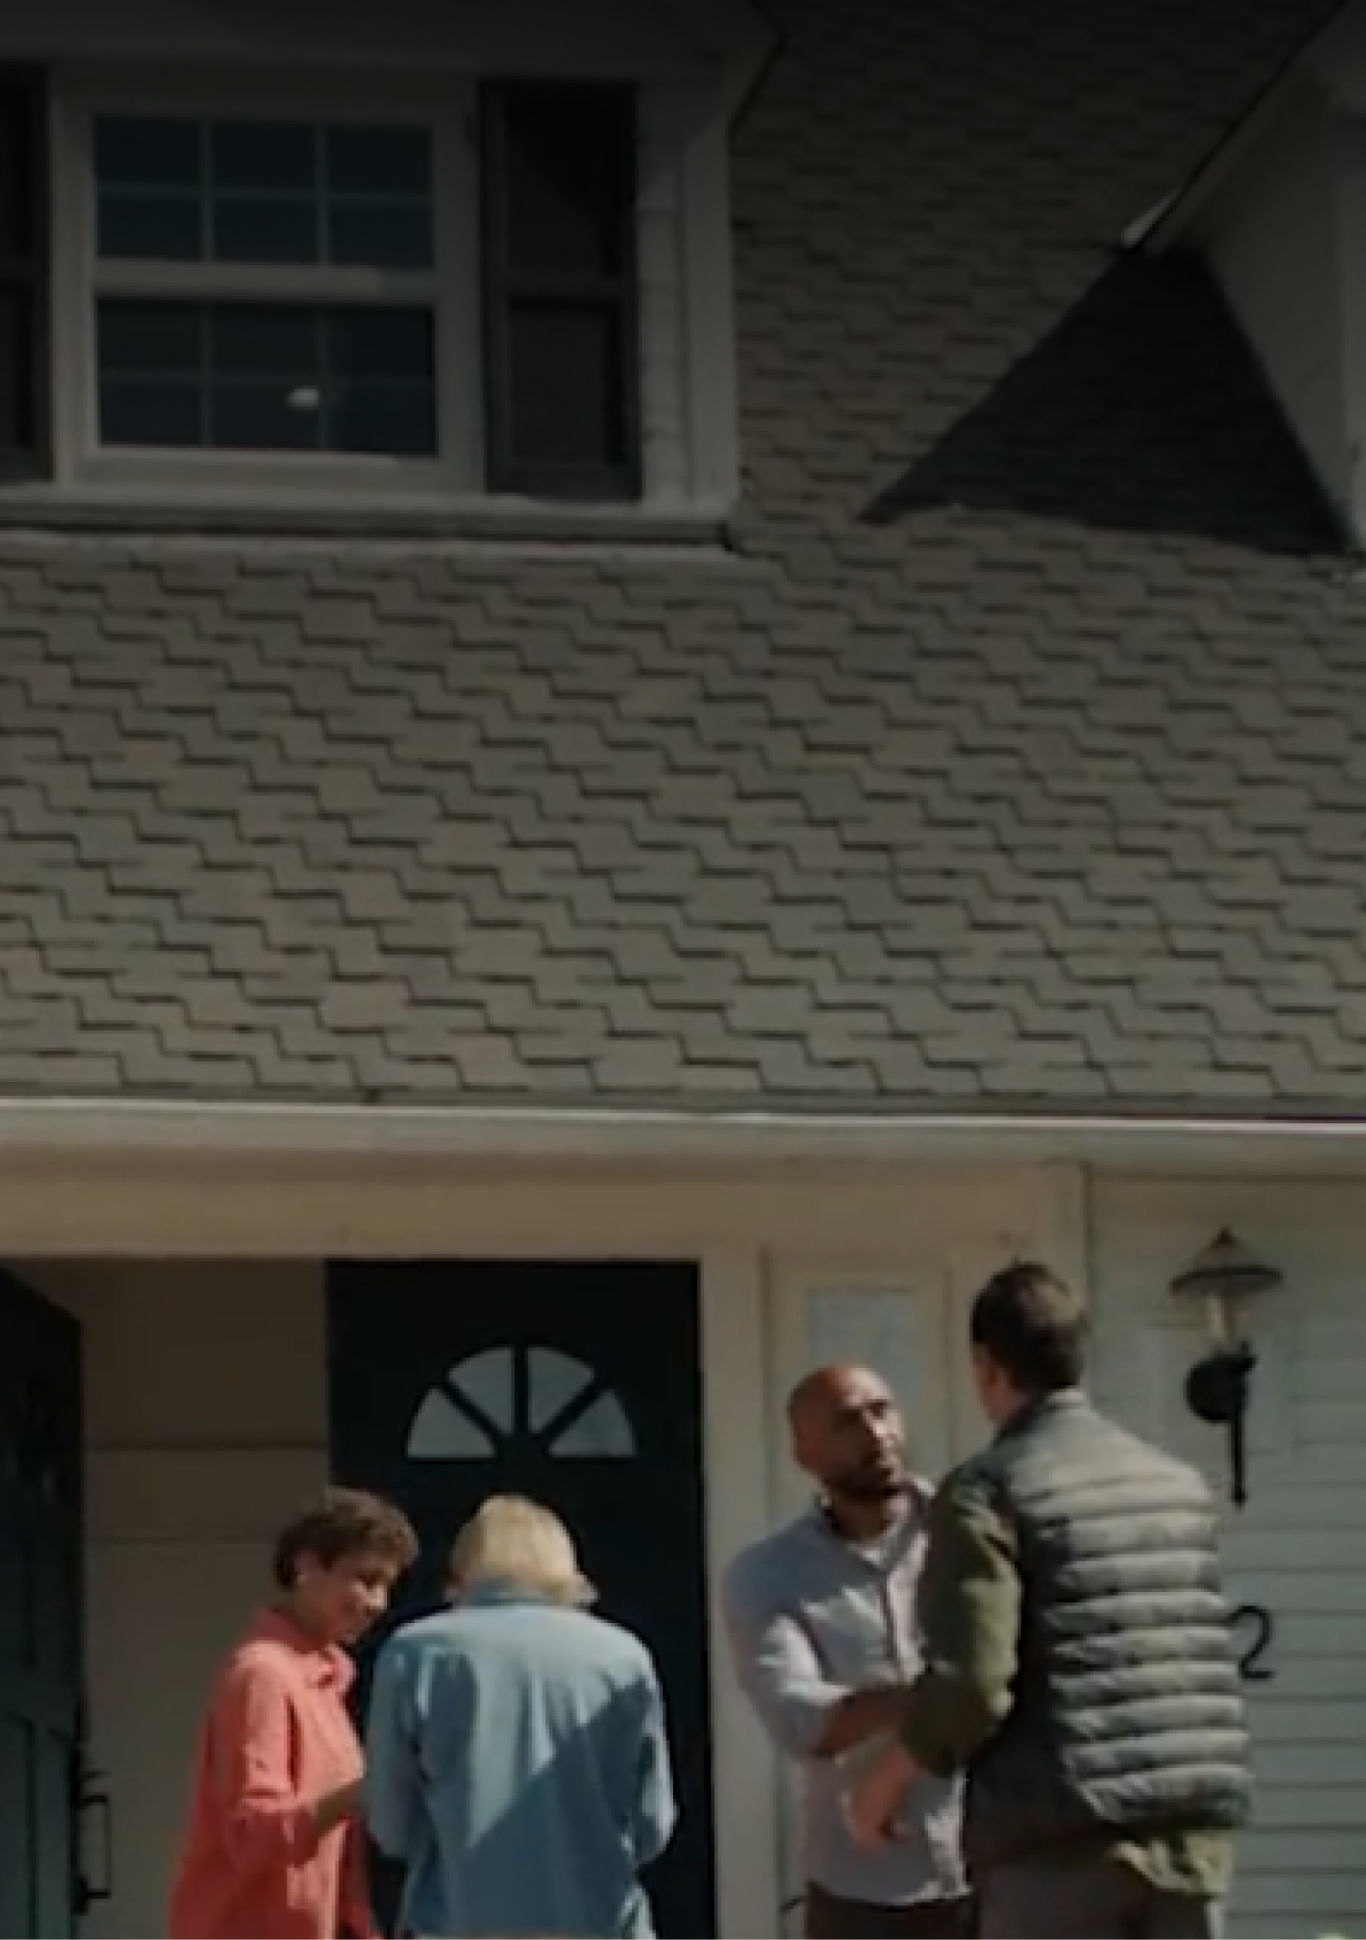 A husband and wife welcome a new couple to the neighborhood. The husbands shake hands near the “sold” sign on the lawn while the wives head in through the open door.